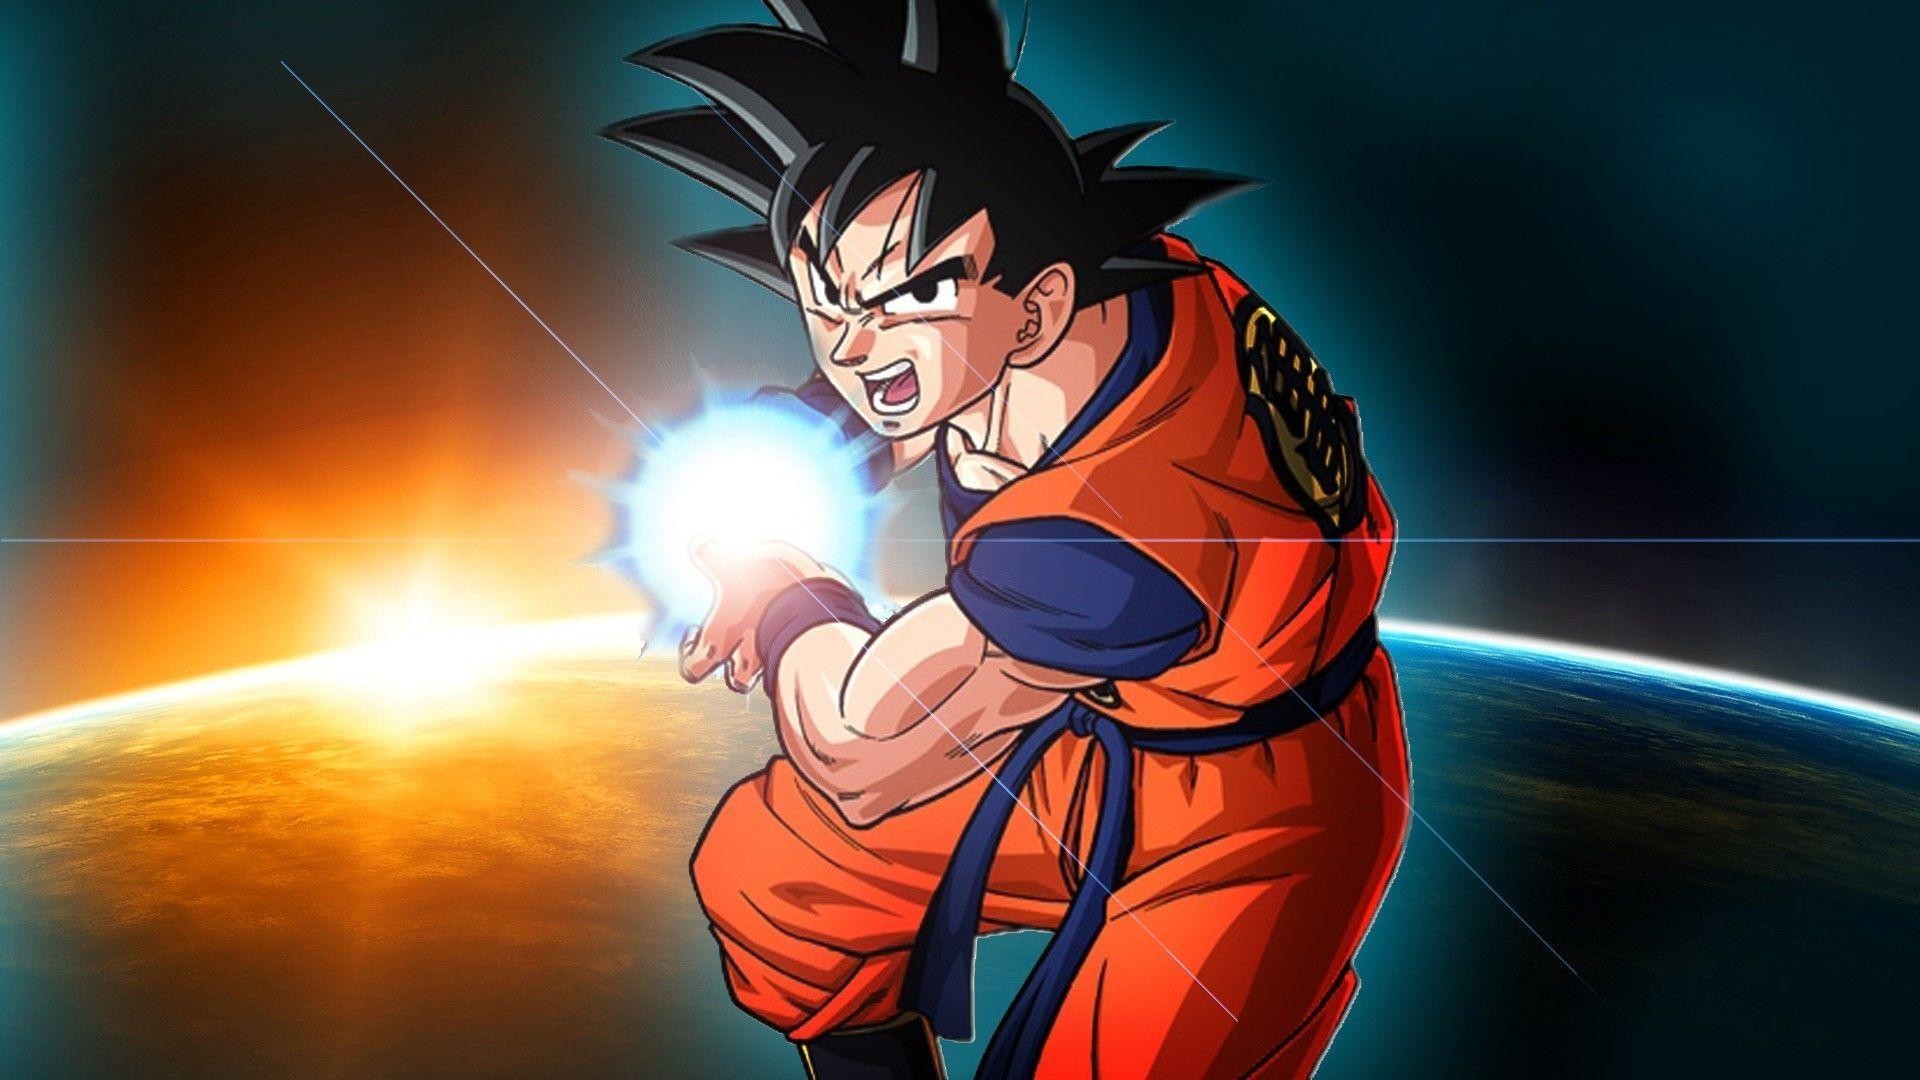 Goku Images HD Backgrounds with image resolution 1920x1080 pixel. You can make this wallpaper for your Desktop Computer Backgrounds, Mac Wallpapers, Android Lock screen or iPhone Screensavers